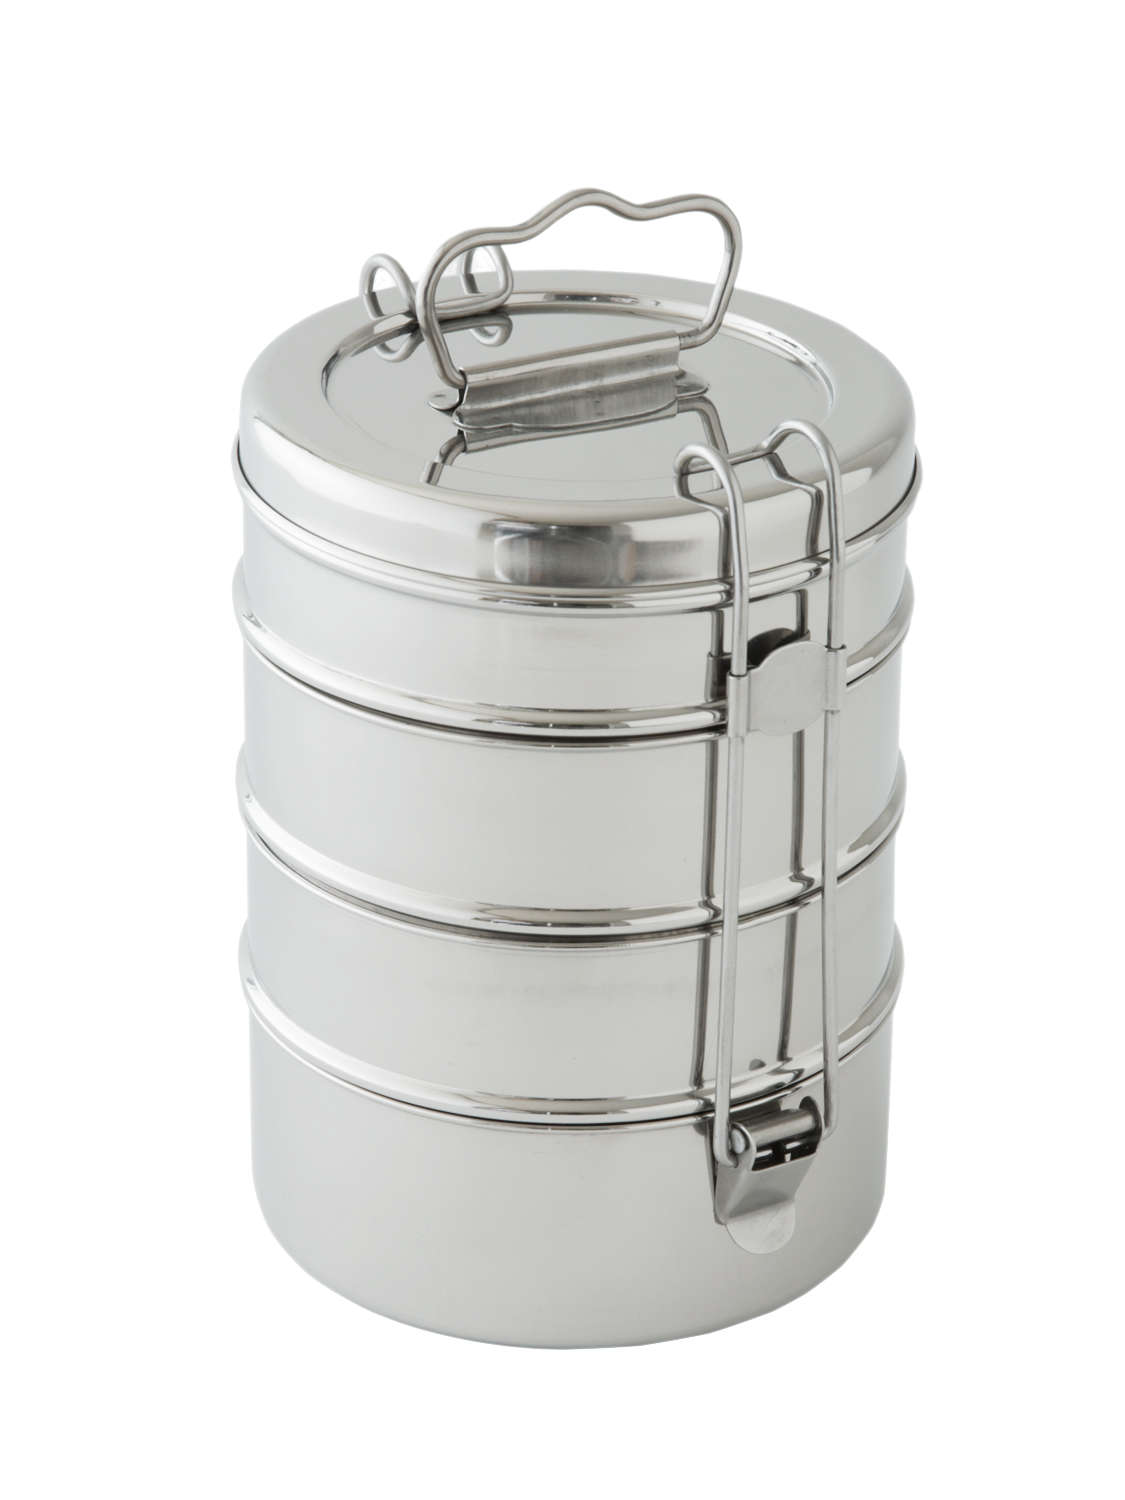 Stainless Steel Lunch Box Lid, Stainless Steel Food Thermos